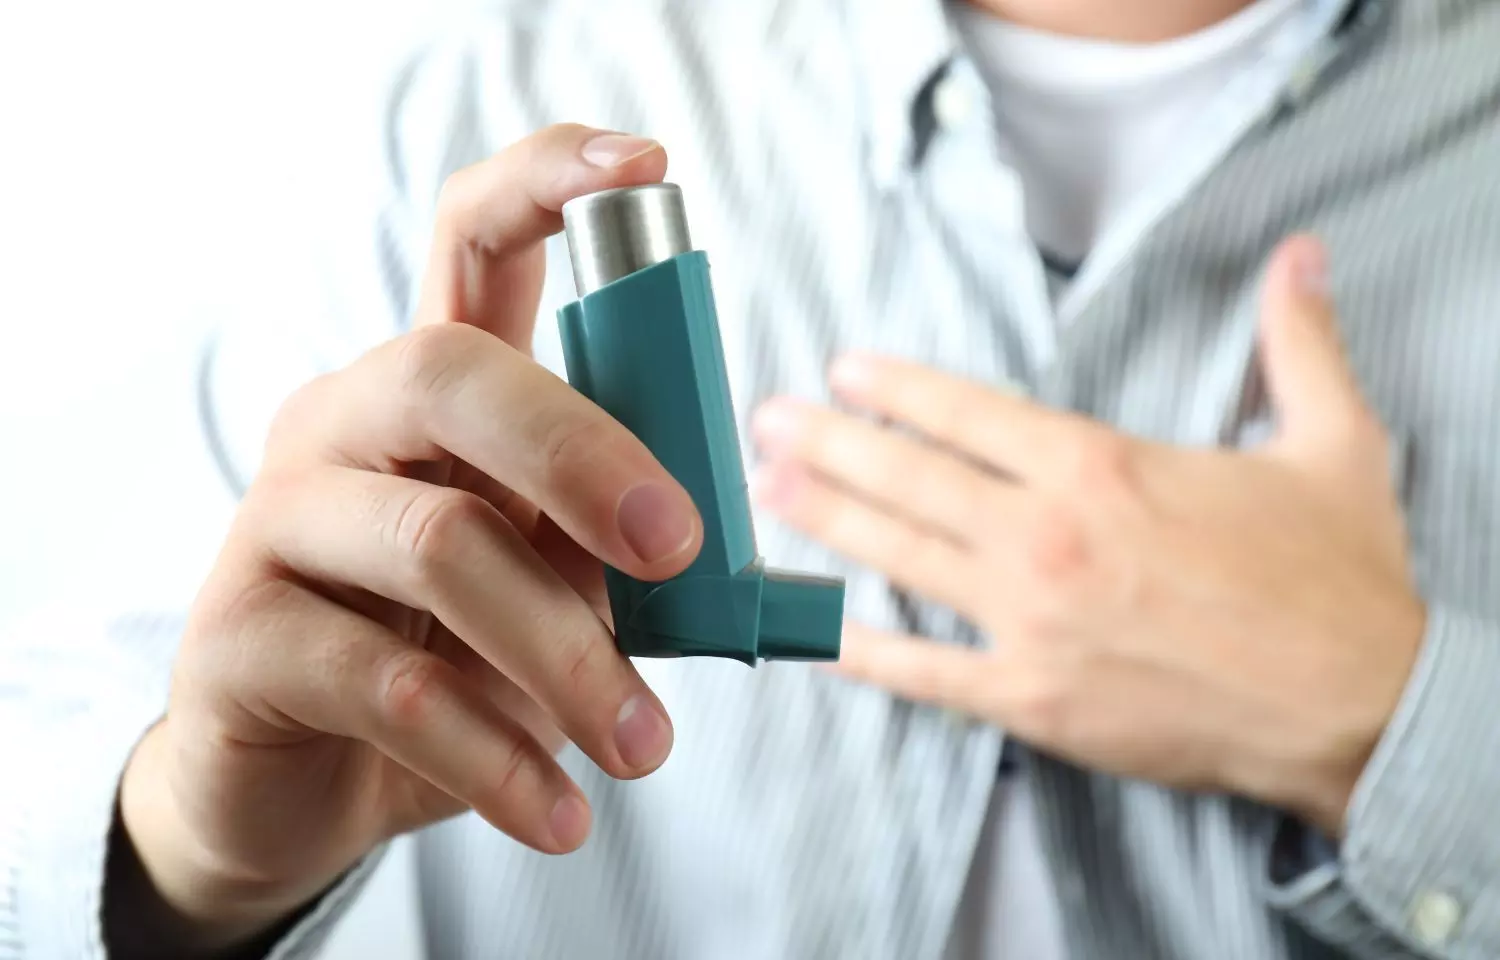 Stopping mepolizumab after long-term use increases asthma exacerbations, study says